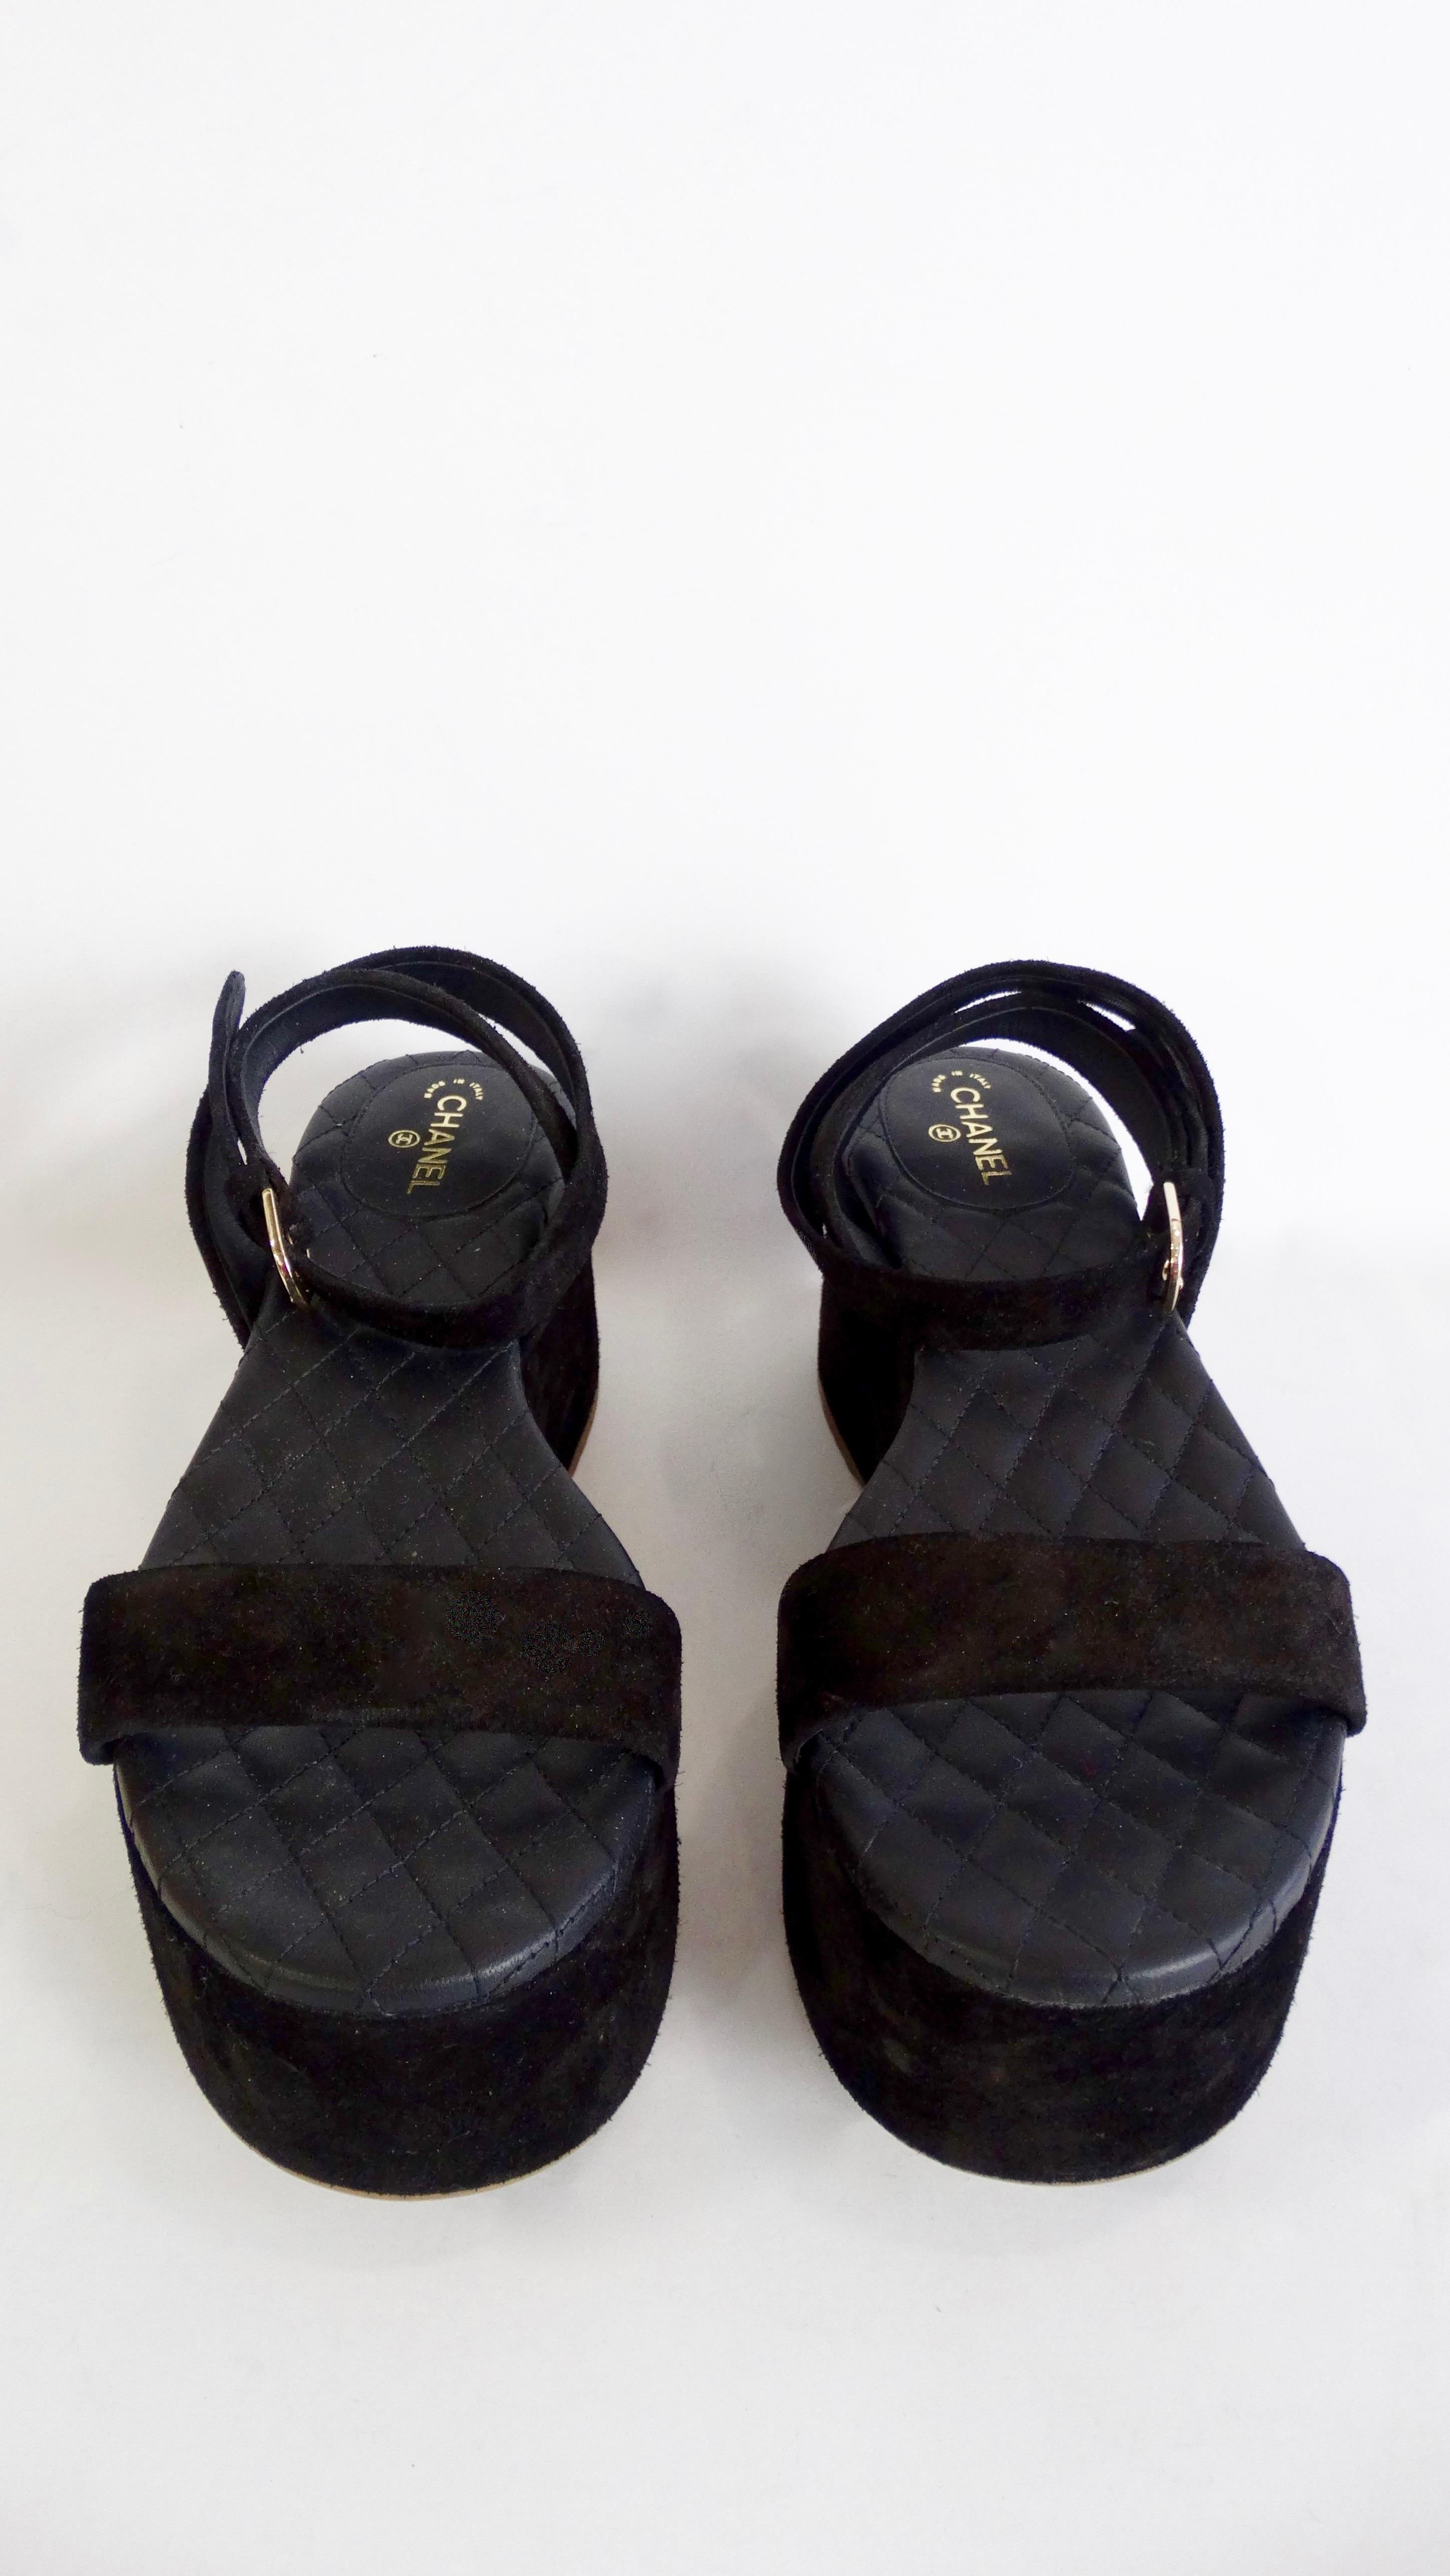 Take a walk with Chanel! Circa 2015, these platform sandals are made of black suede and feature the signature Chanel quilting on the insole. Includes a silver plated CC logo at the heel and a wrap ankle strap with a 